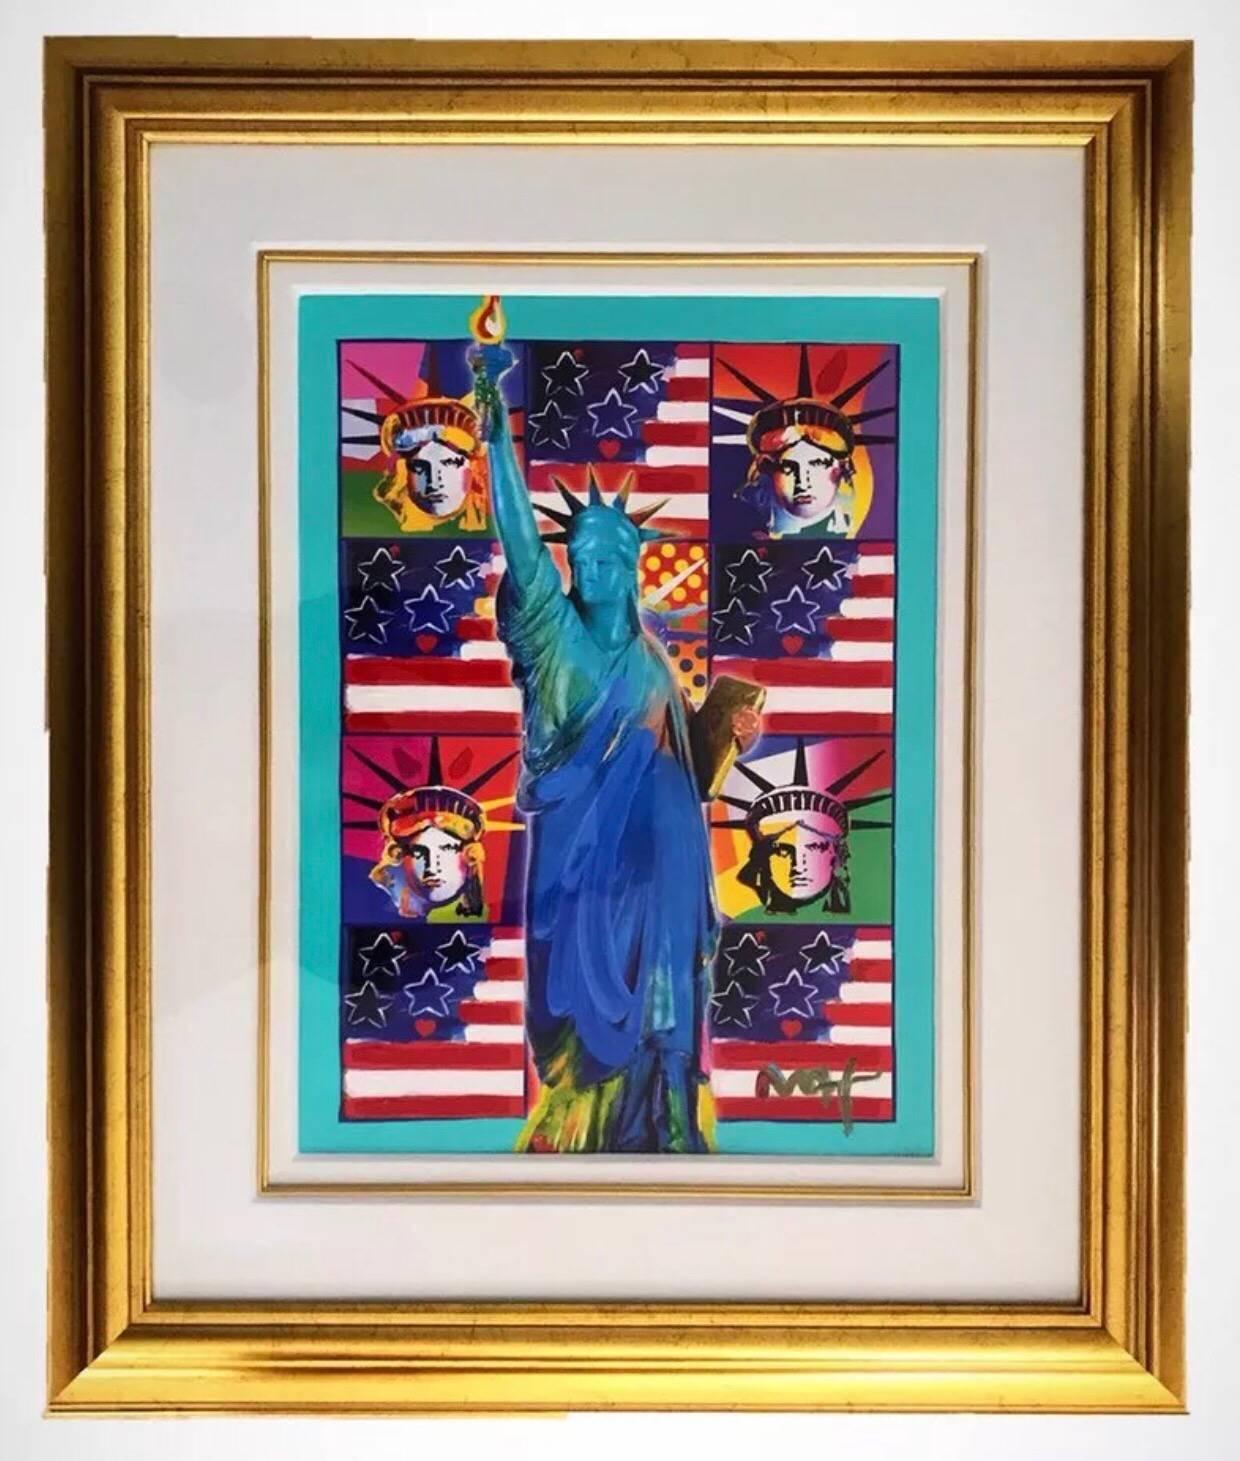 Peter Max - God Bless America III
With Five Liberties.
FRAMED (gilt and linen)
REGISTRATION NUMBER:156567.0922
APPRAISED VALUE (2015) $12,800 (U.S)
2005
24” x 18”
Mixed media with acrylic painting and colour lithography on paper.
Signed in